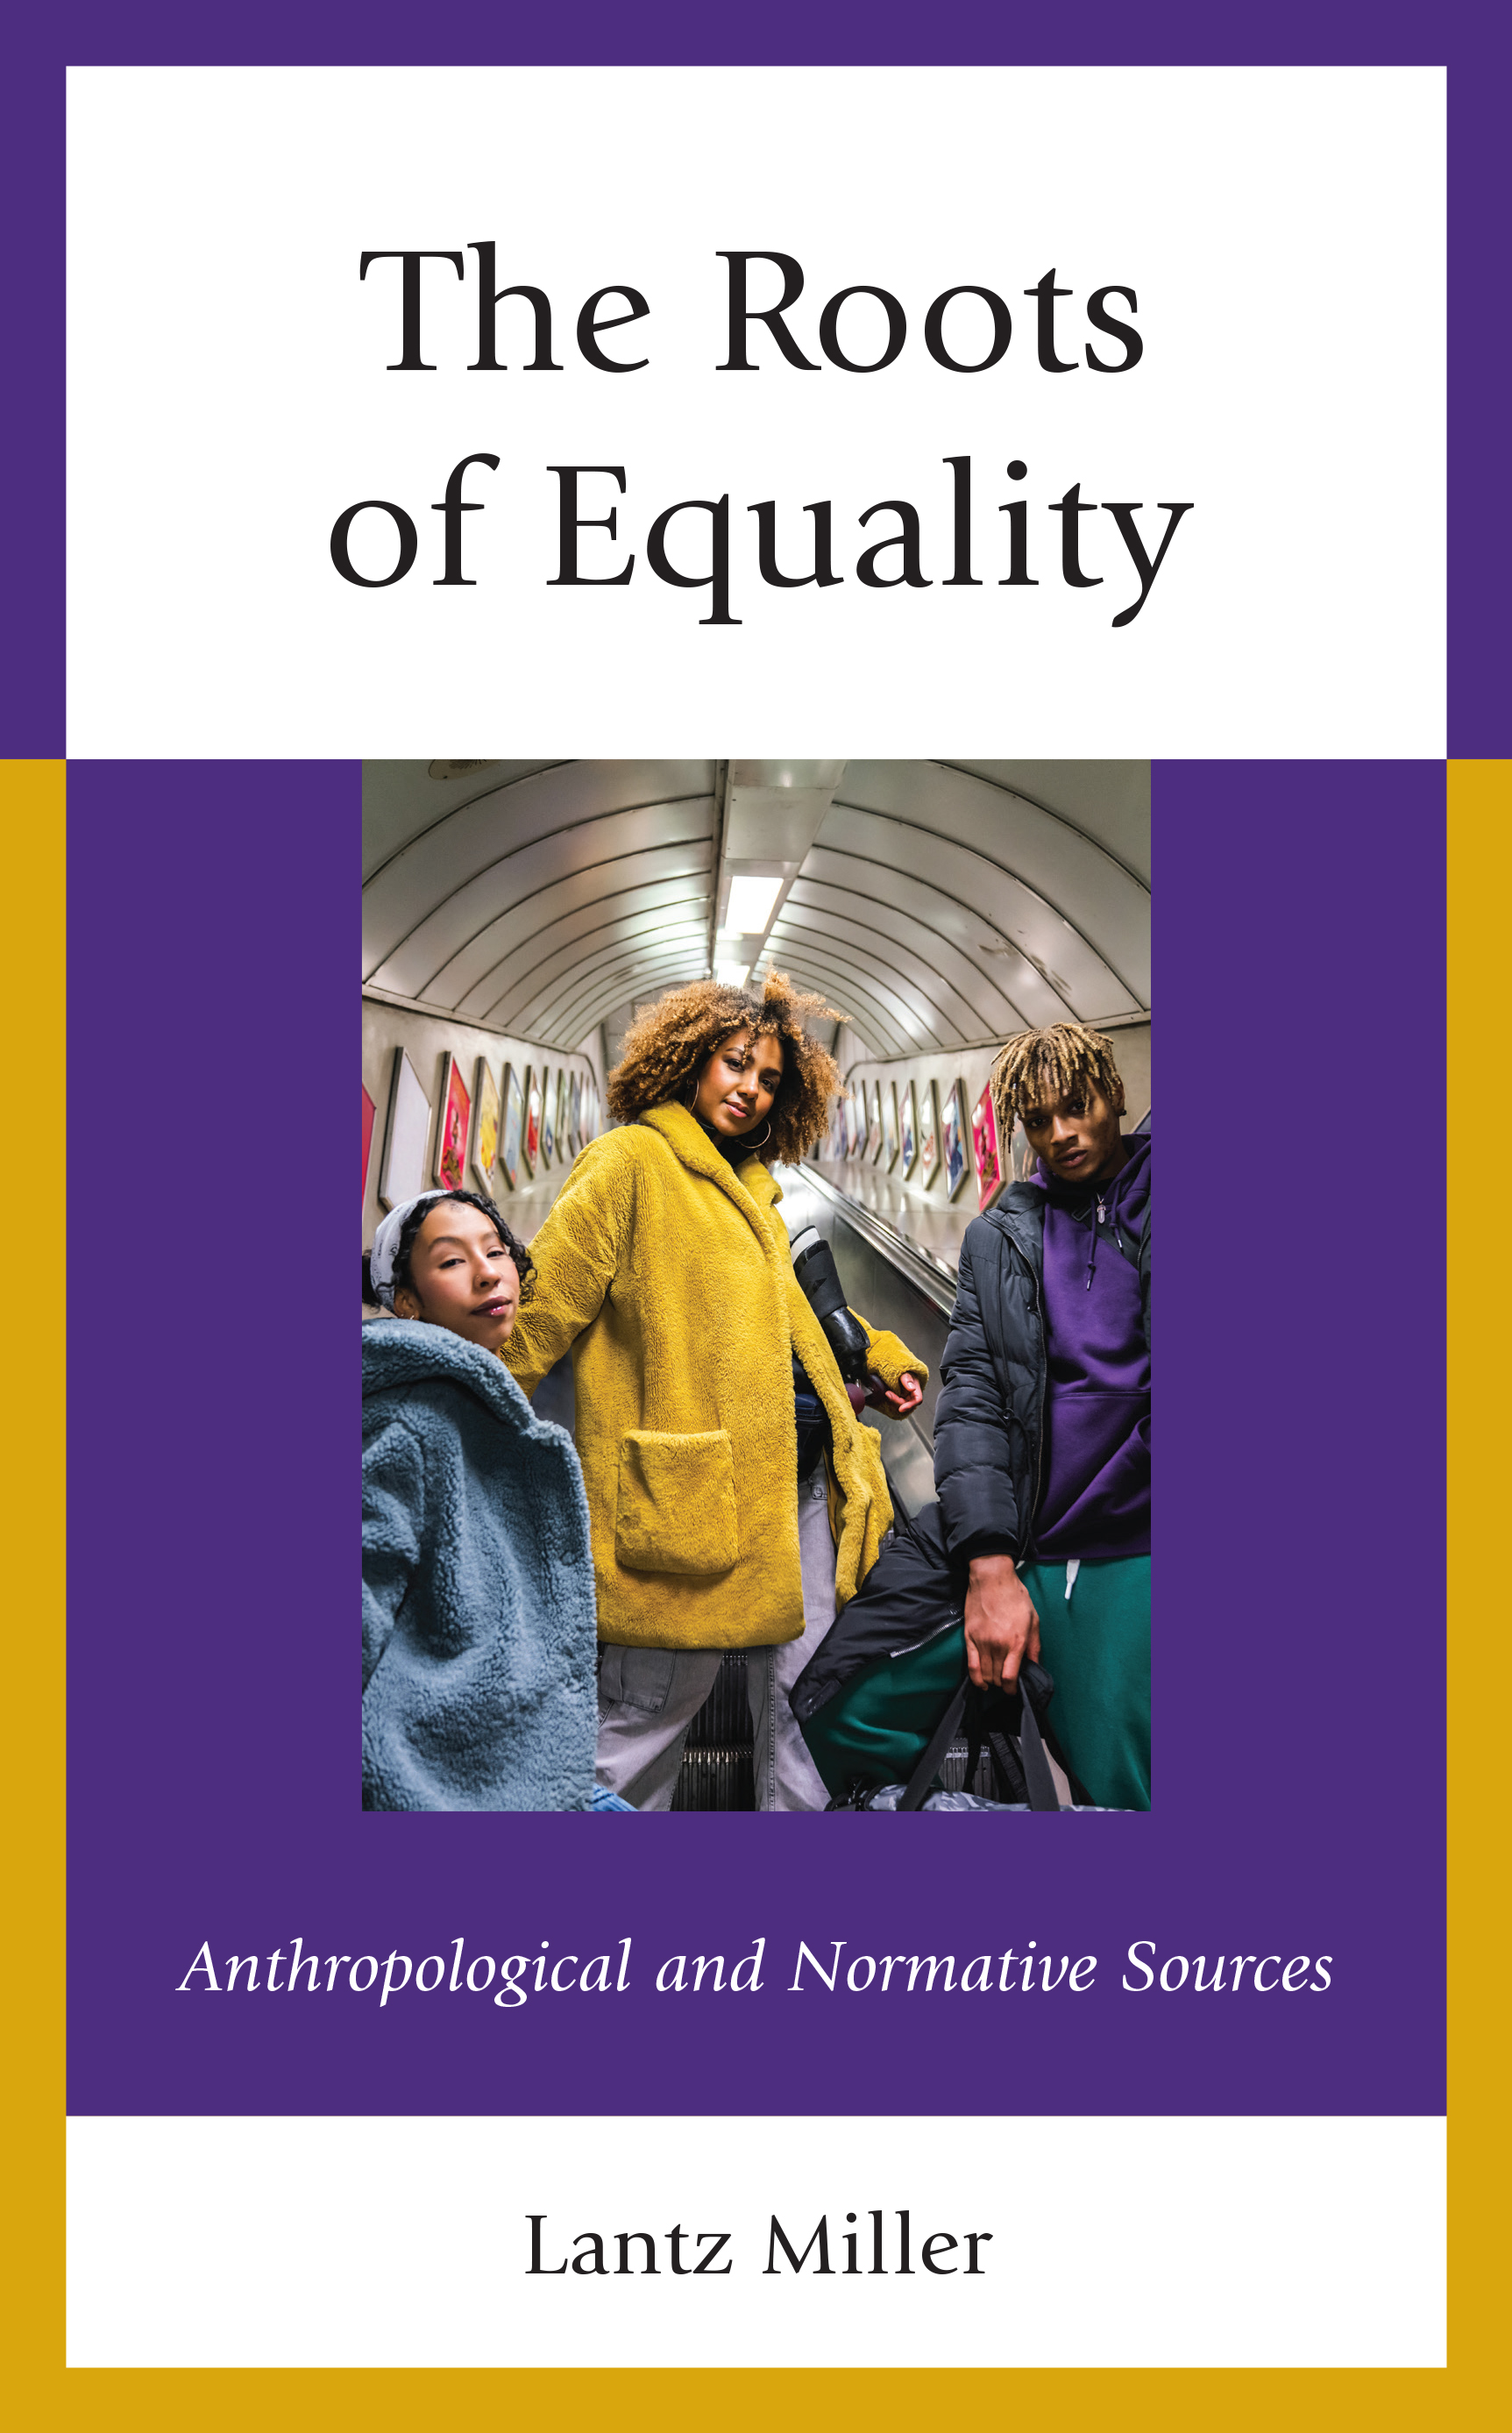 The Roots of Equality: Anthropological and Normative Sources